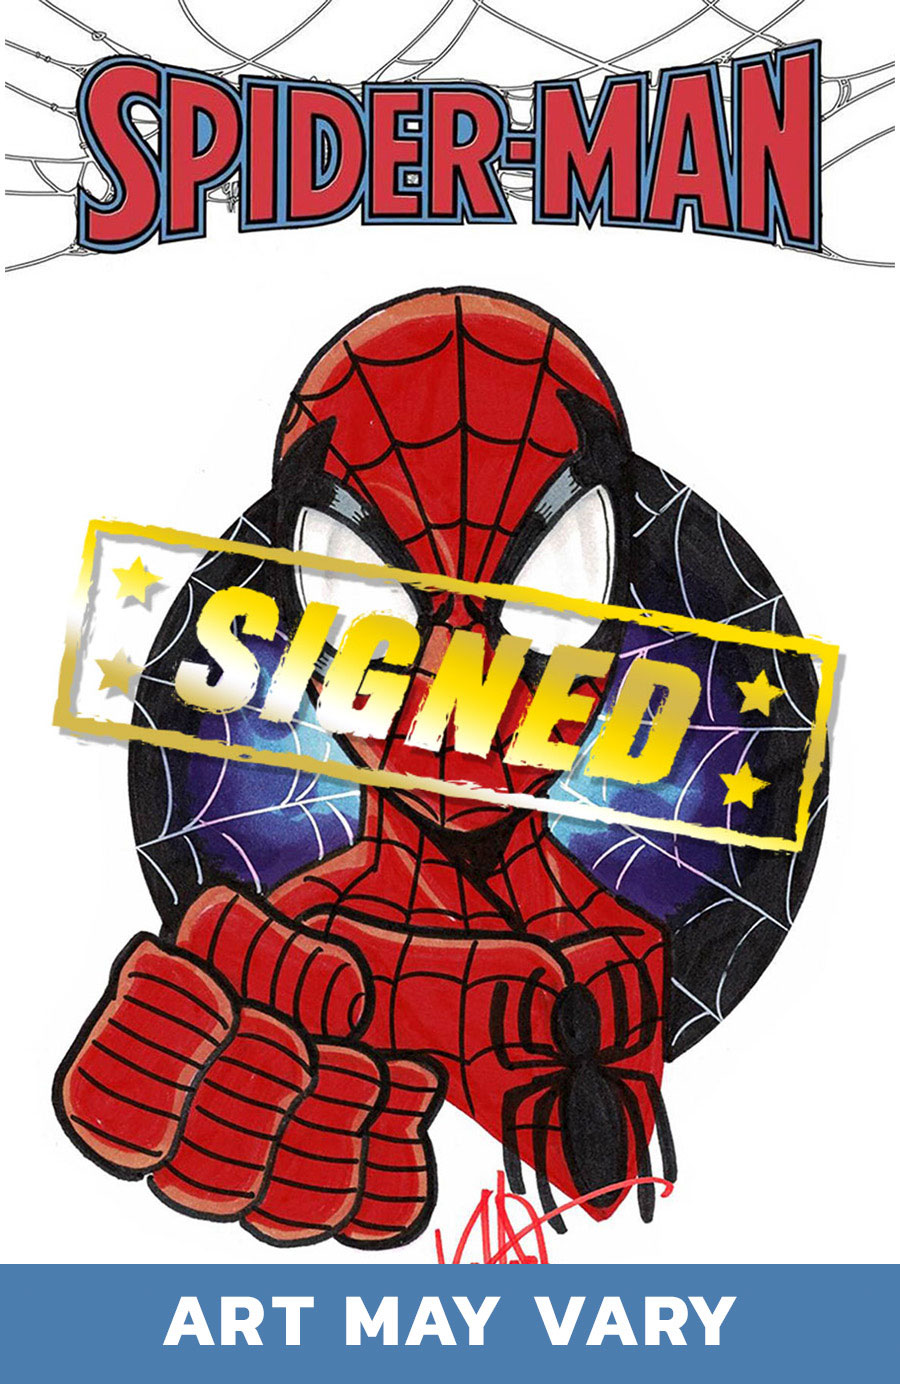 Spider-Man Vol 4 #1 Cover O DF Blank Variant Commissioned Cover Art Signed & Remarked By Ken Haeser With A Hand-Drawn Spider-Man Sketch